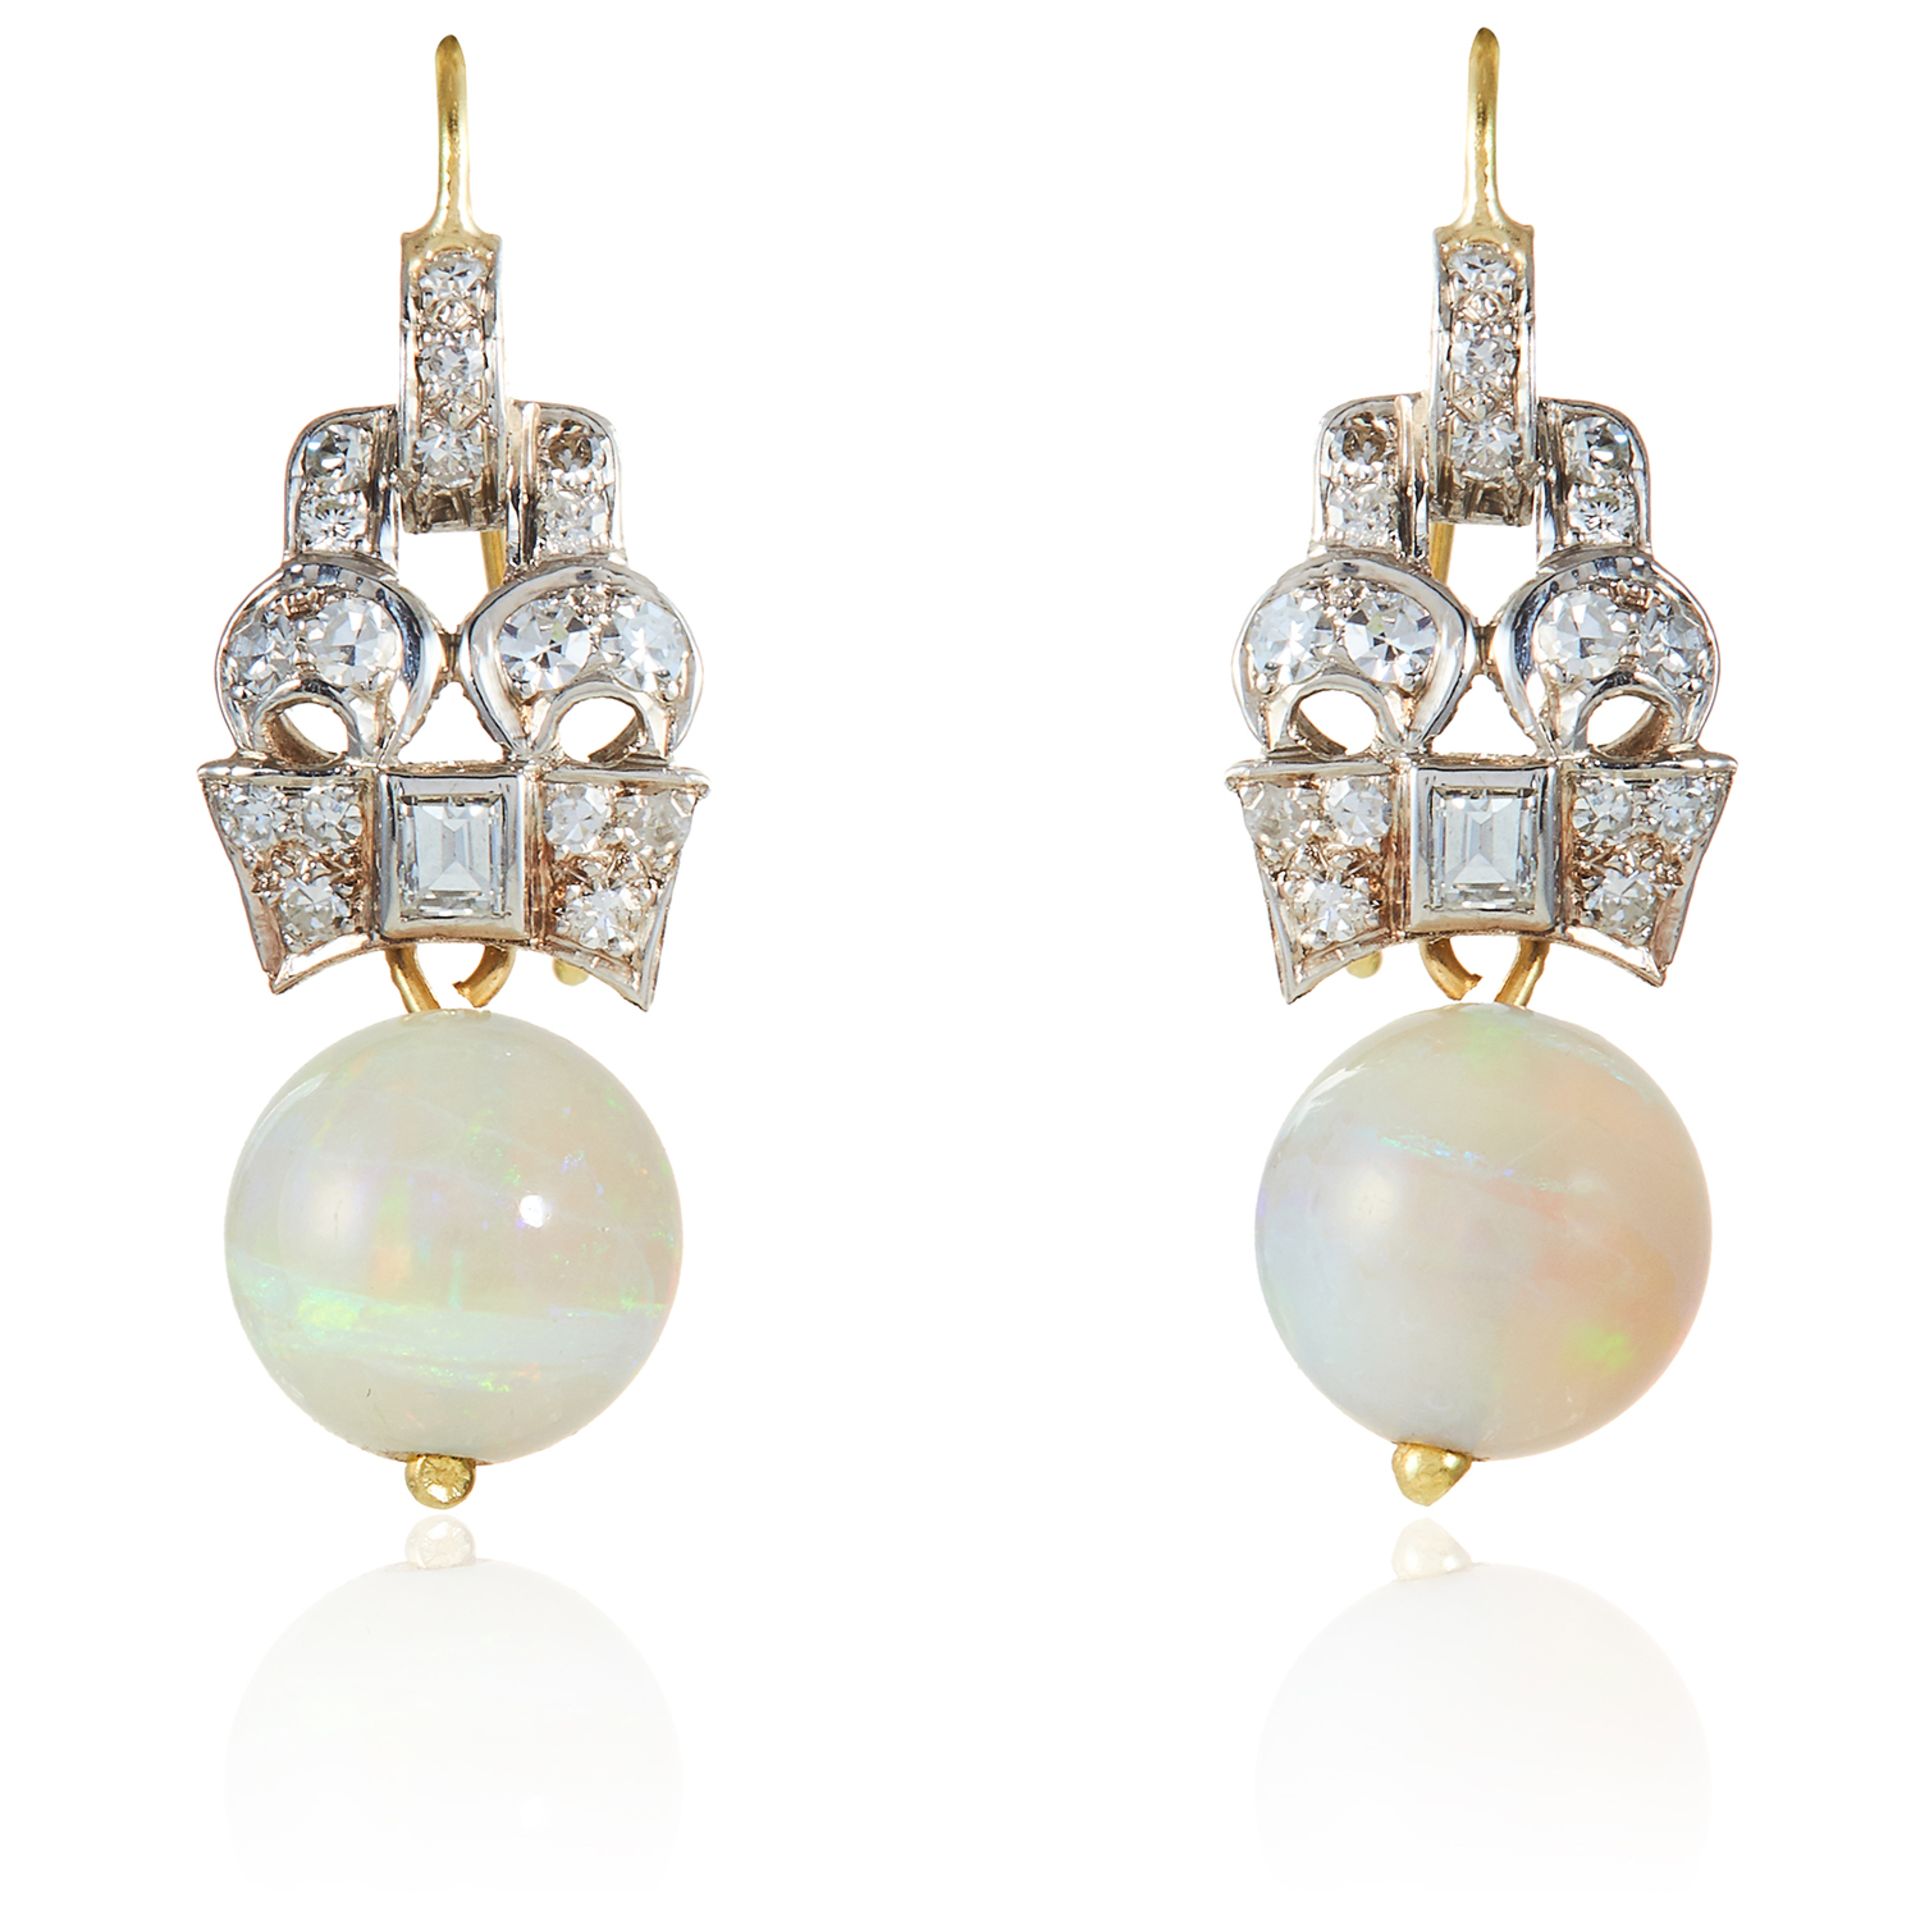 A PAIR OF ART DECO OPAL AND DIAMOND EARRINGS in gold and platinum, each suspending an opal bead of